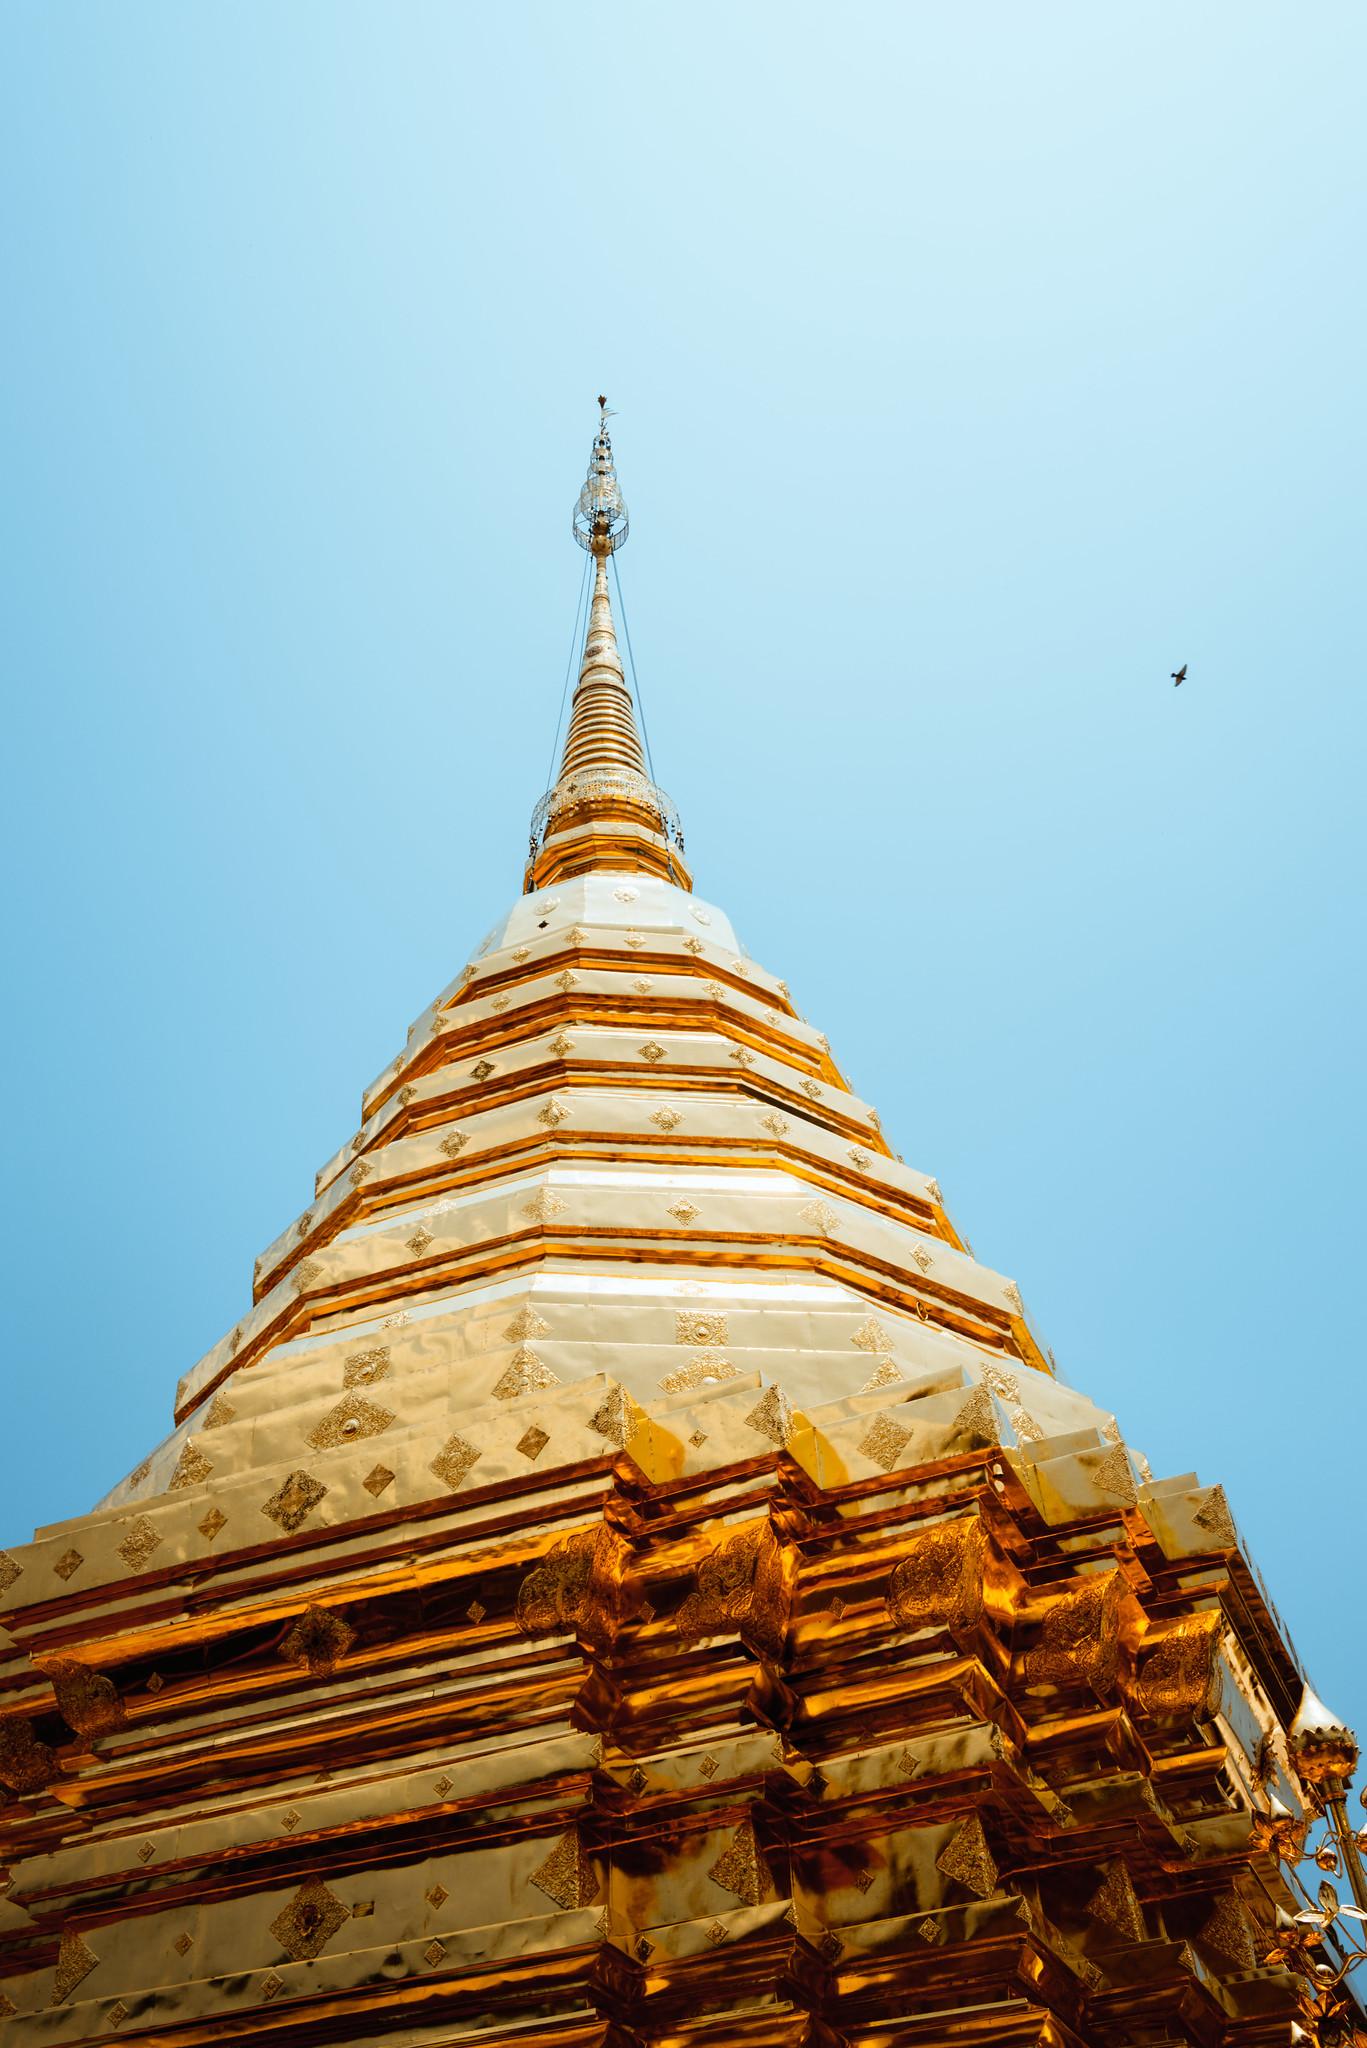 The Gold-Gilded Stupa